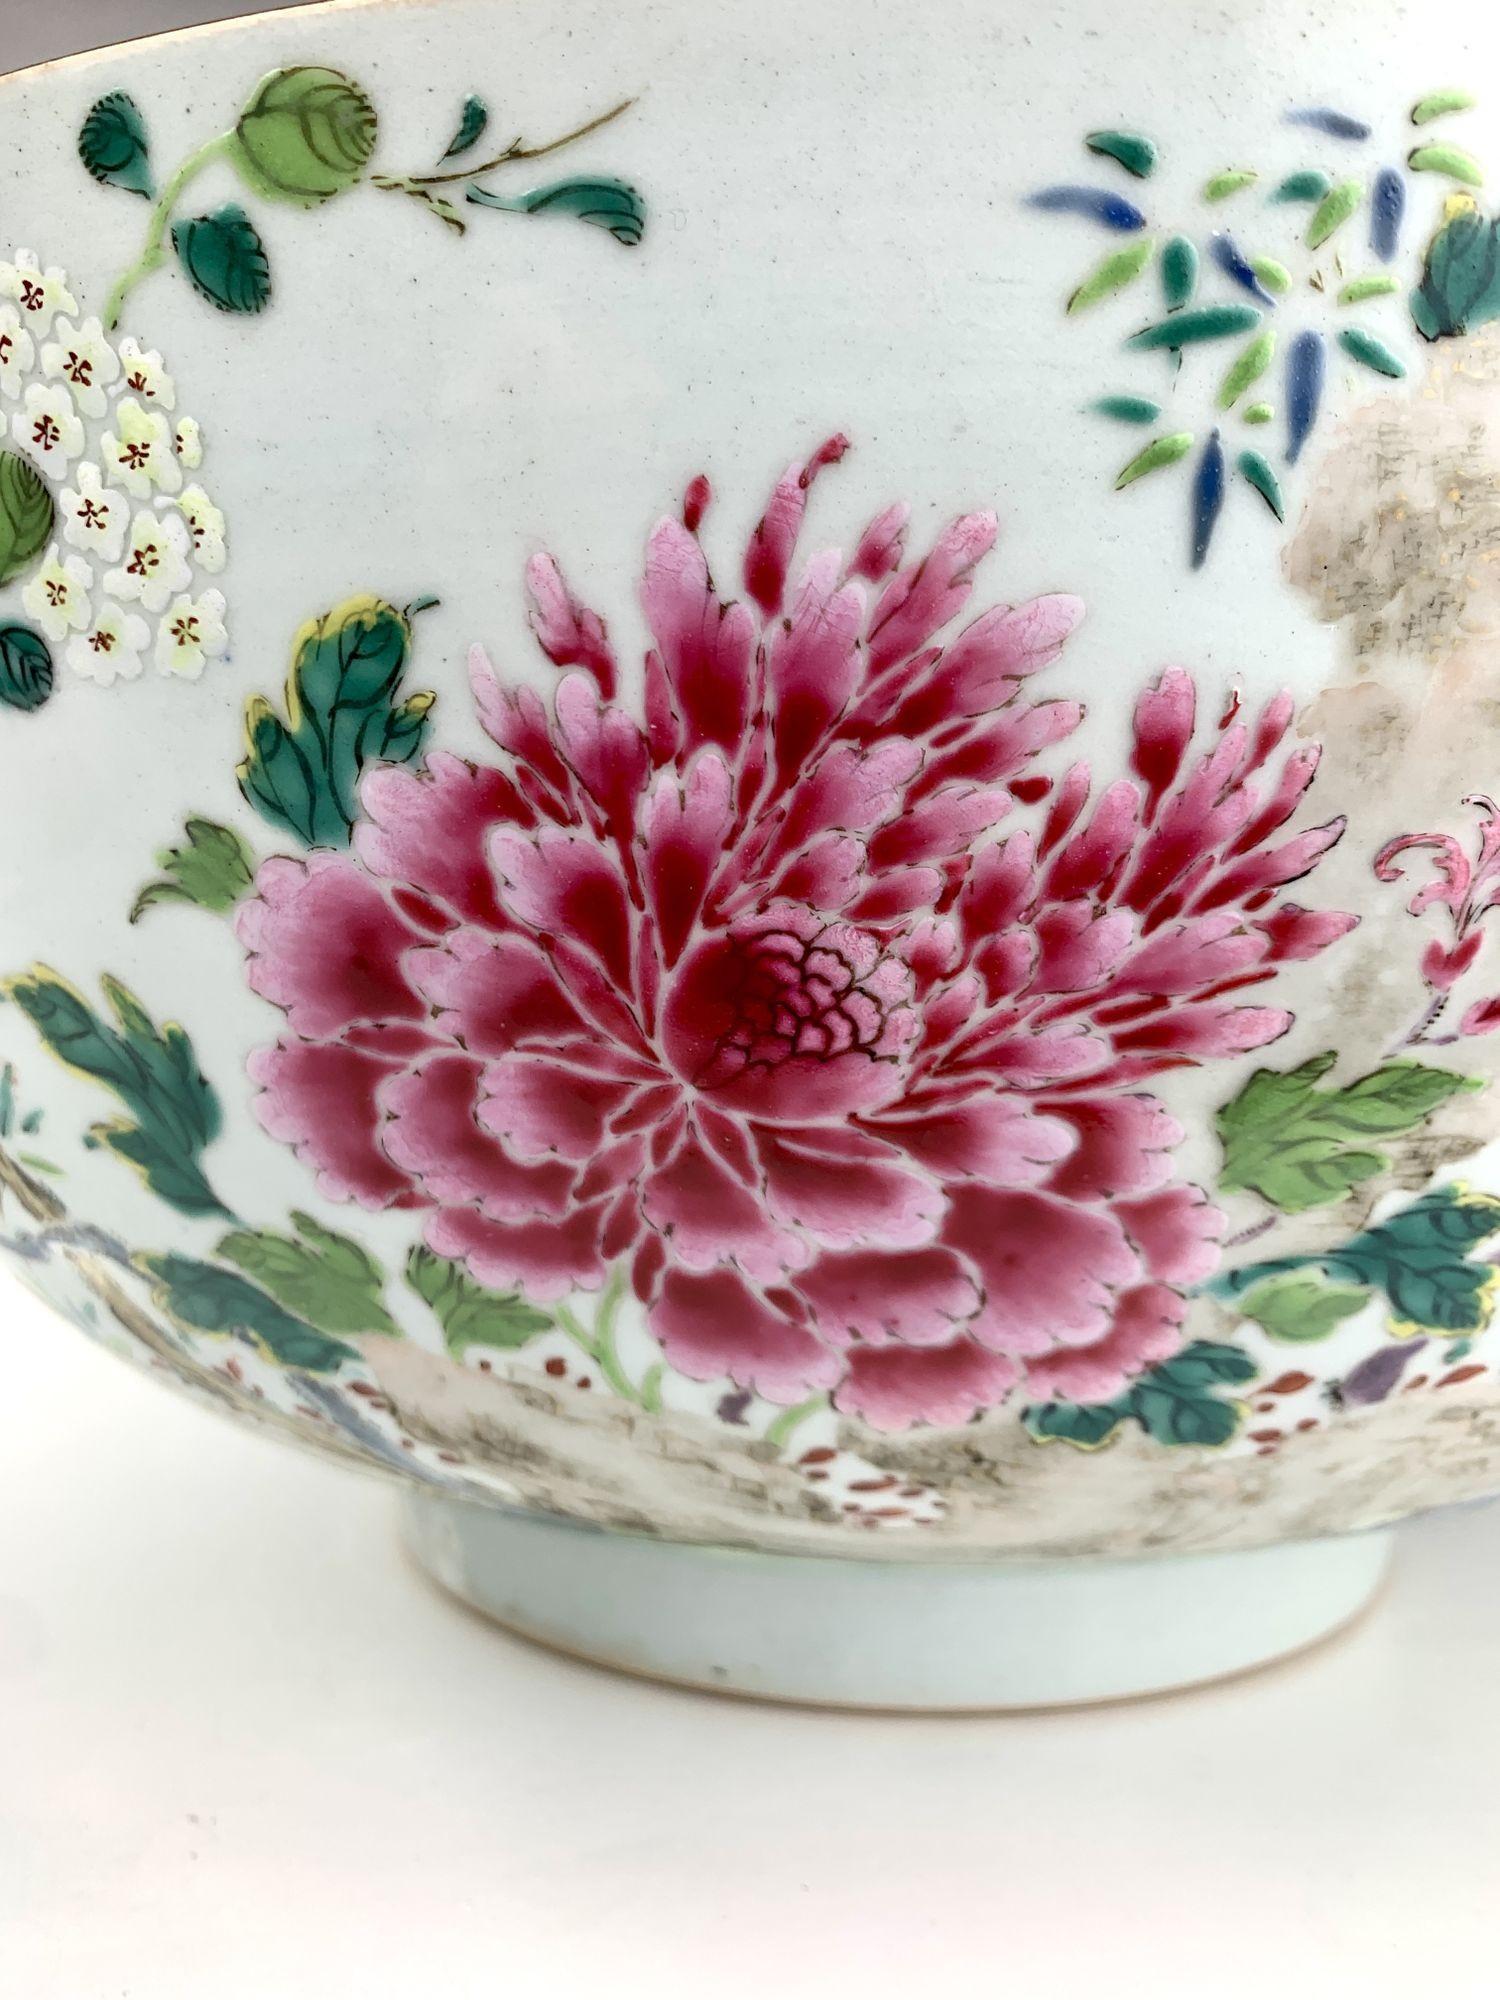 This is an altogether fabulous bowl!
This large antique Chinese porcelain punch bowl was hand painted in the Qianlong Period circa 1760.
The hand-painted Famille Rose decoration is exquisite and vibrant.
We see lifelike carp beautifully painted in